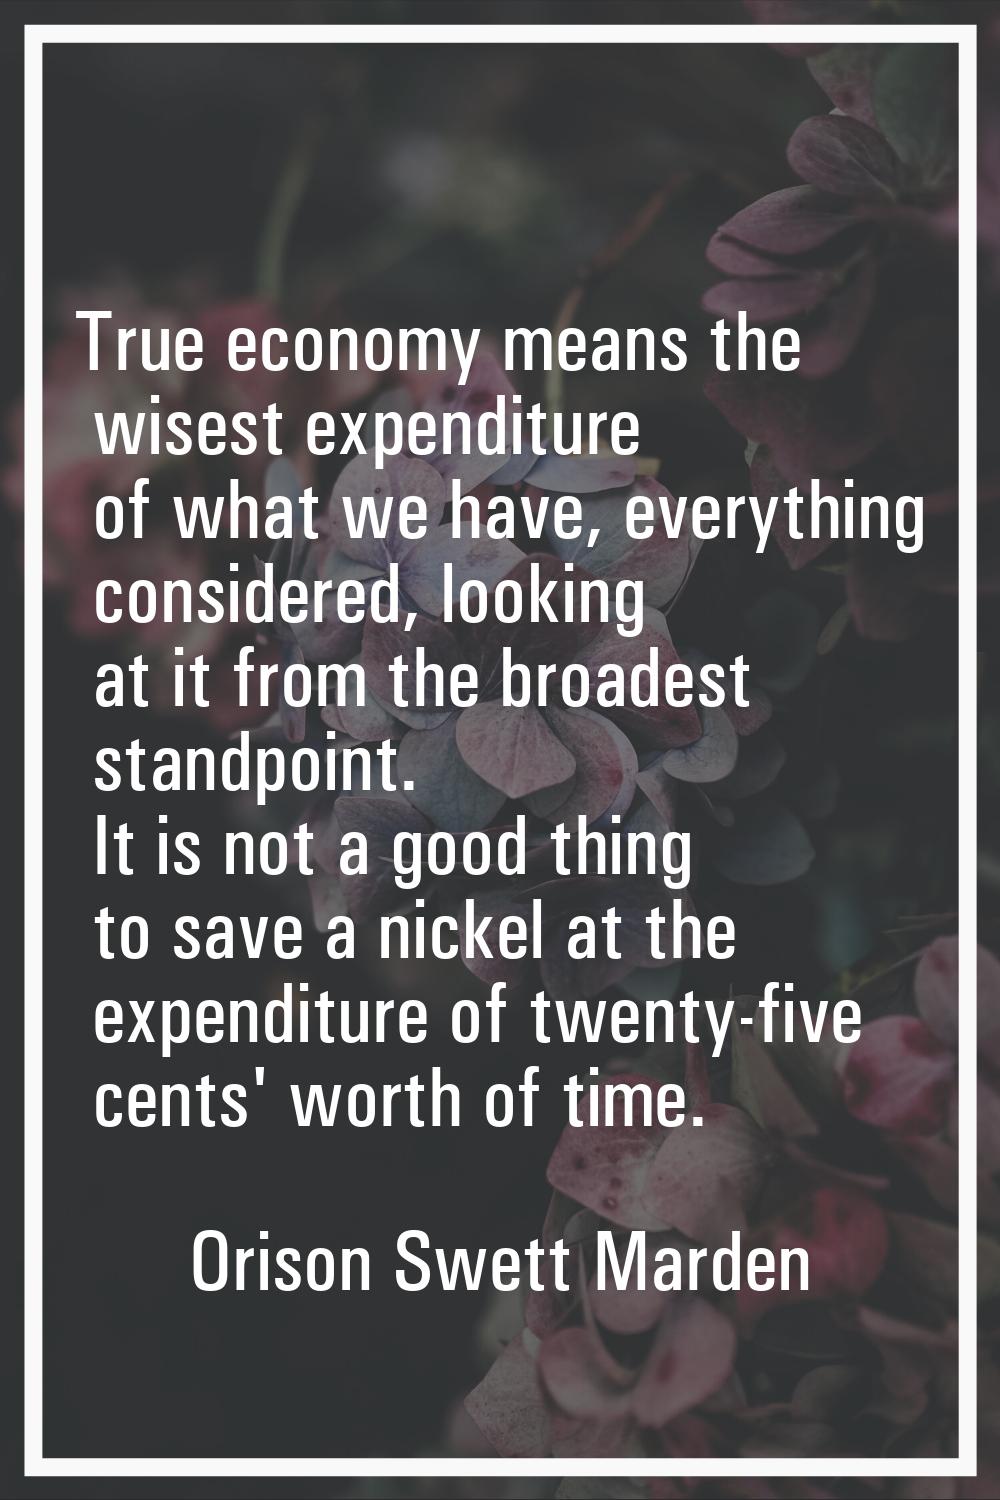 True economy means the wisest expenditure of what we have, everything considered, looking at it fro